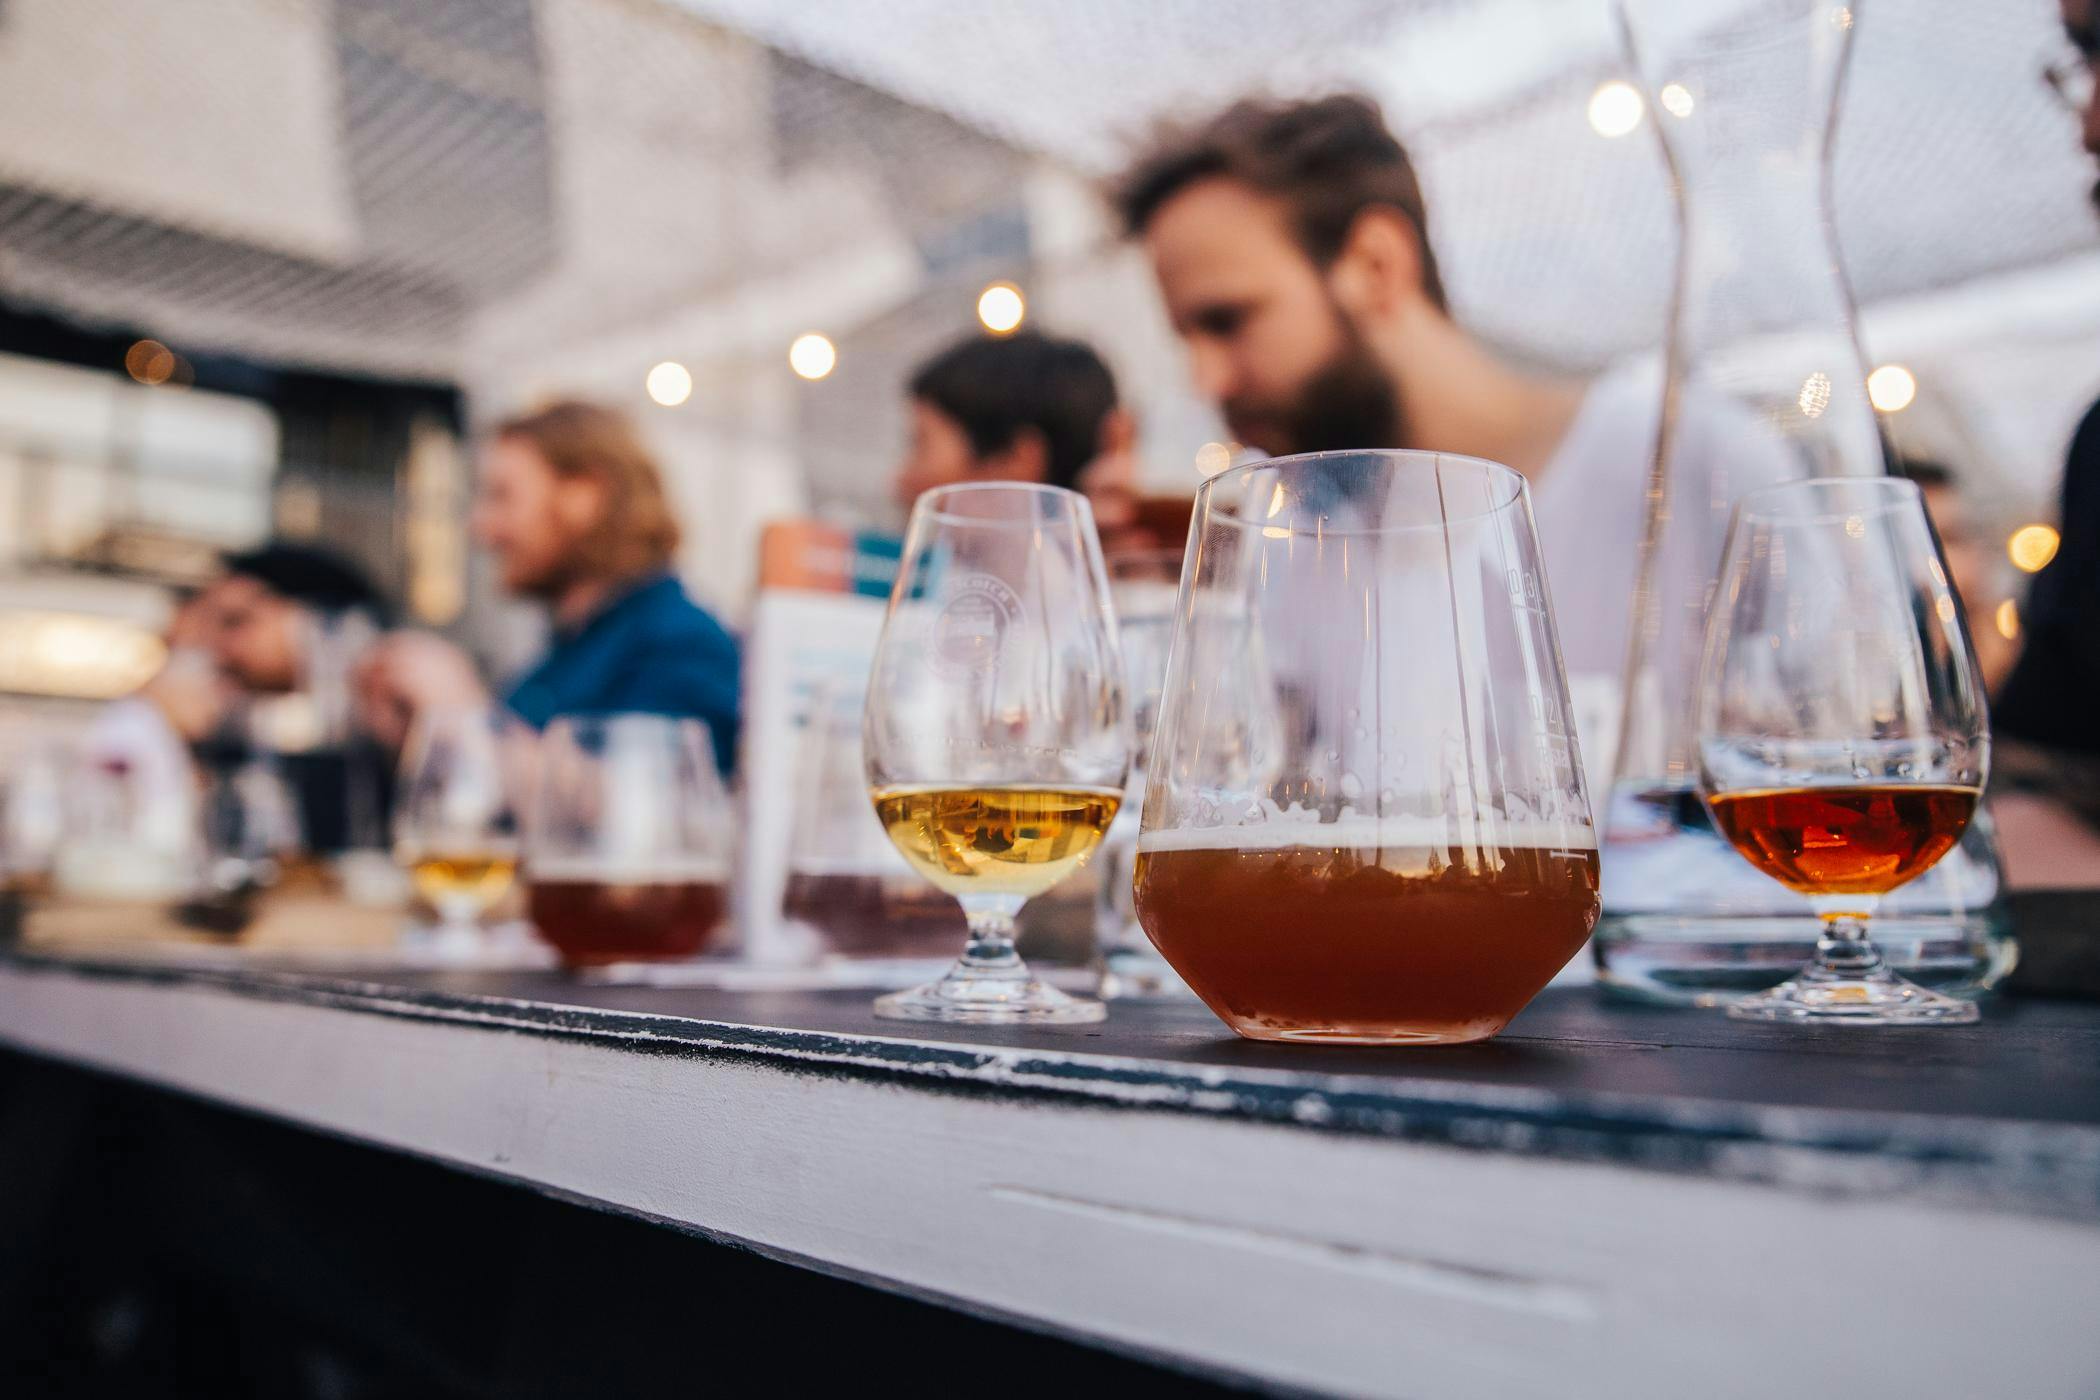 SMWS presents Whisky and Beer Pairing with Coppertail Brewing Co. - Tampa